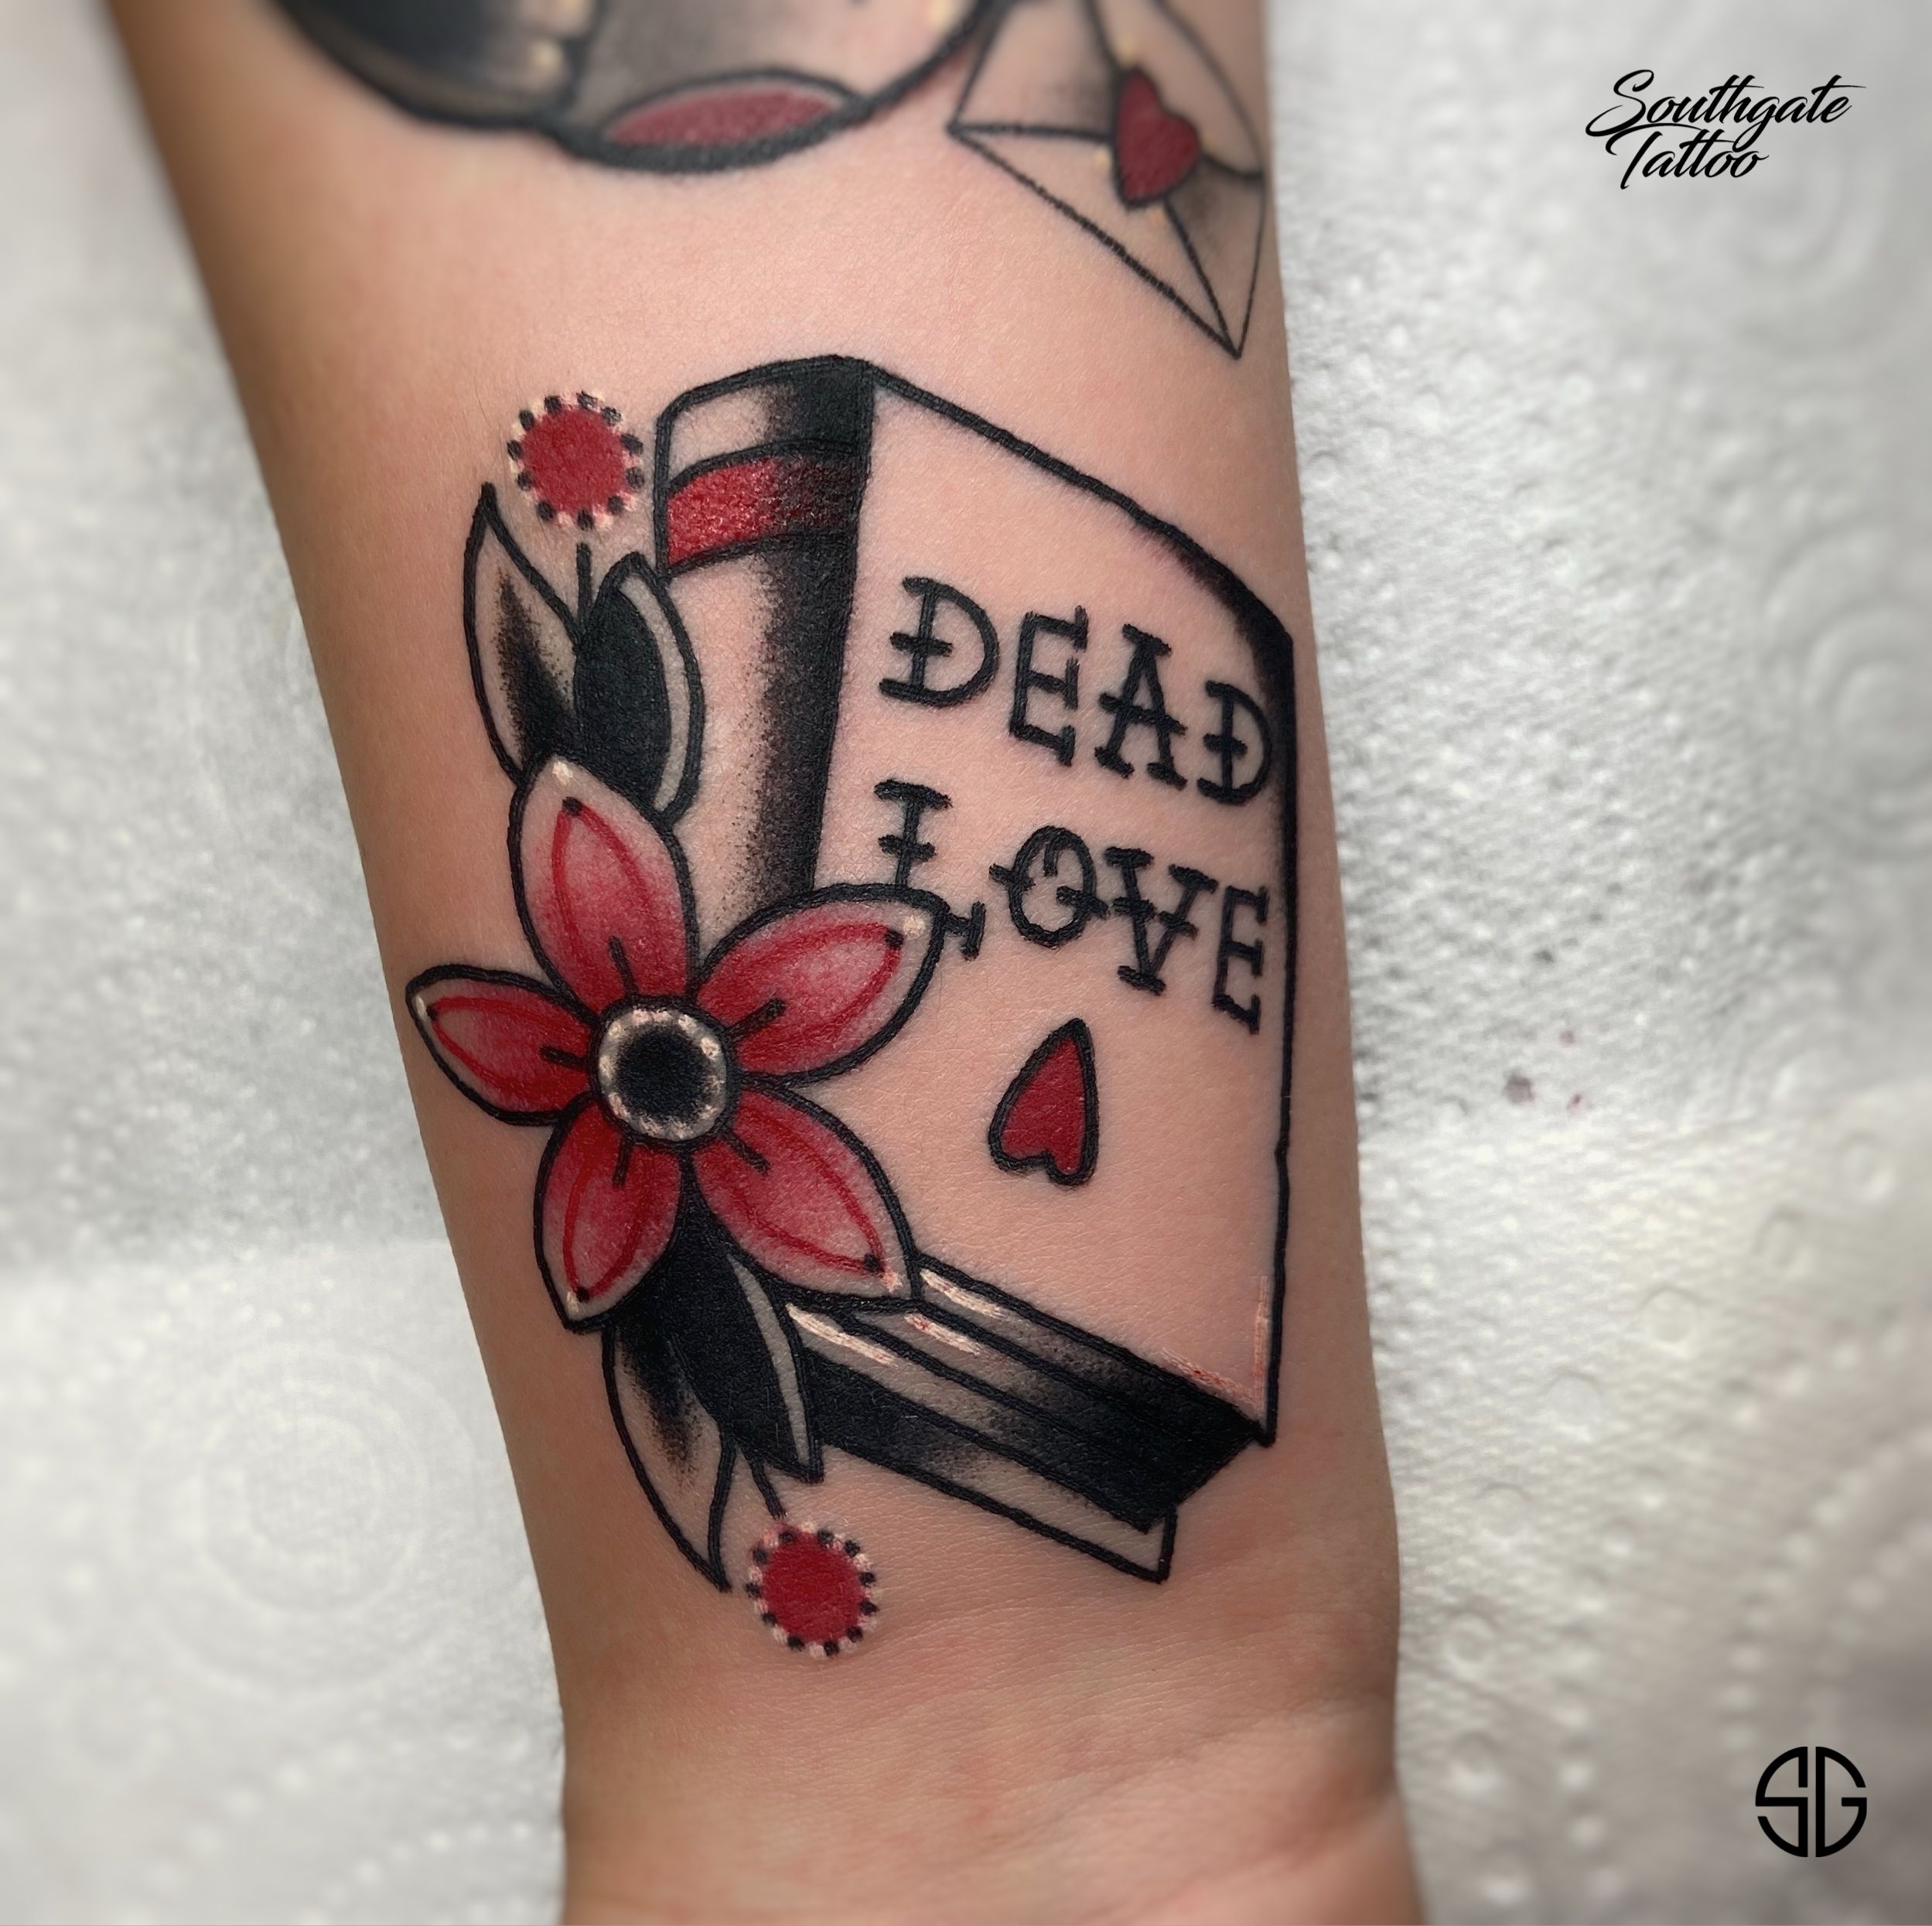 Standard Ink Tattoo Company - *BOOKS NOW CLOSED* It's that time again!  Sarah Hiles's books are open for a limited number of appointments in  January and February! Use the link provided to